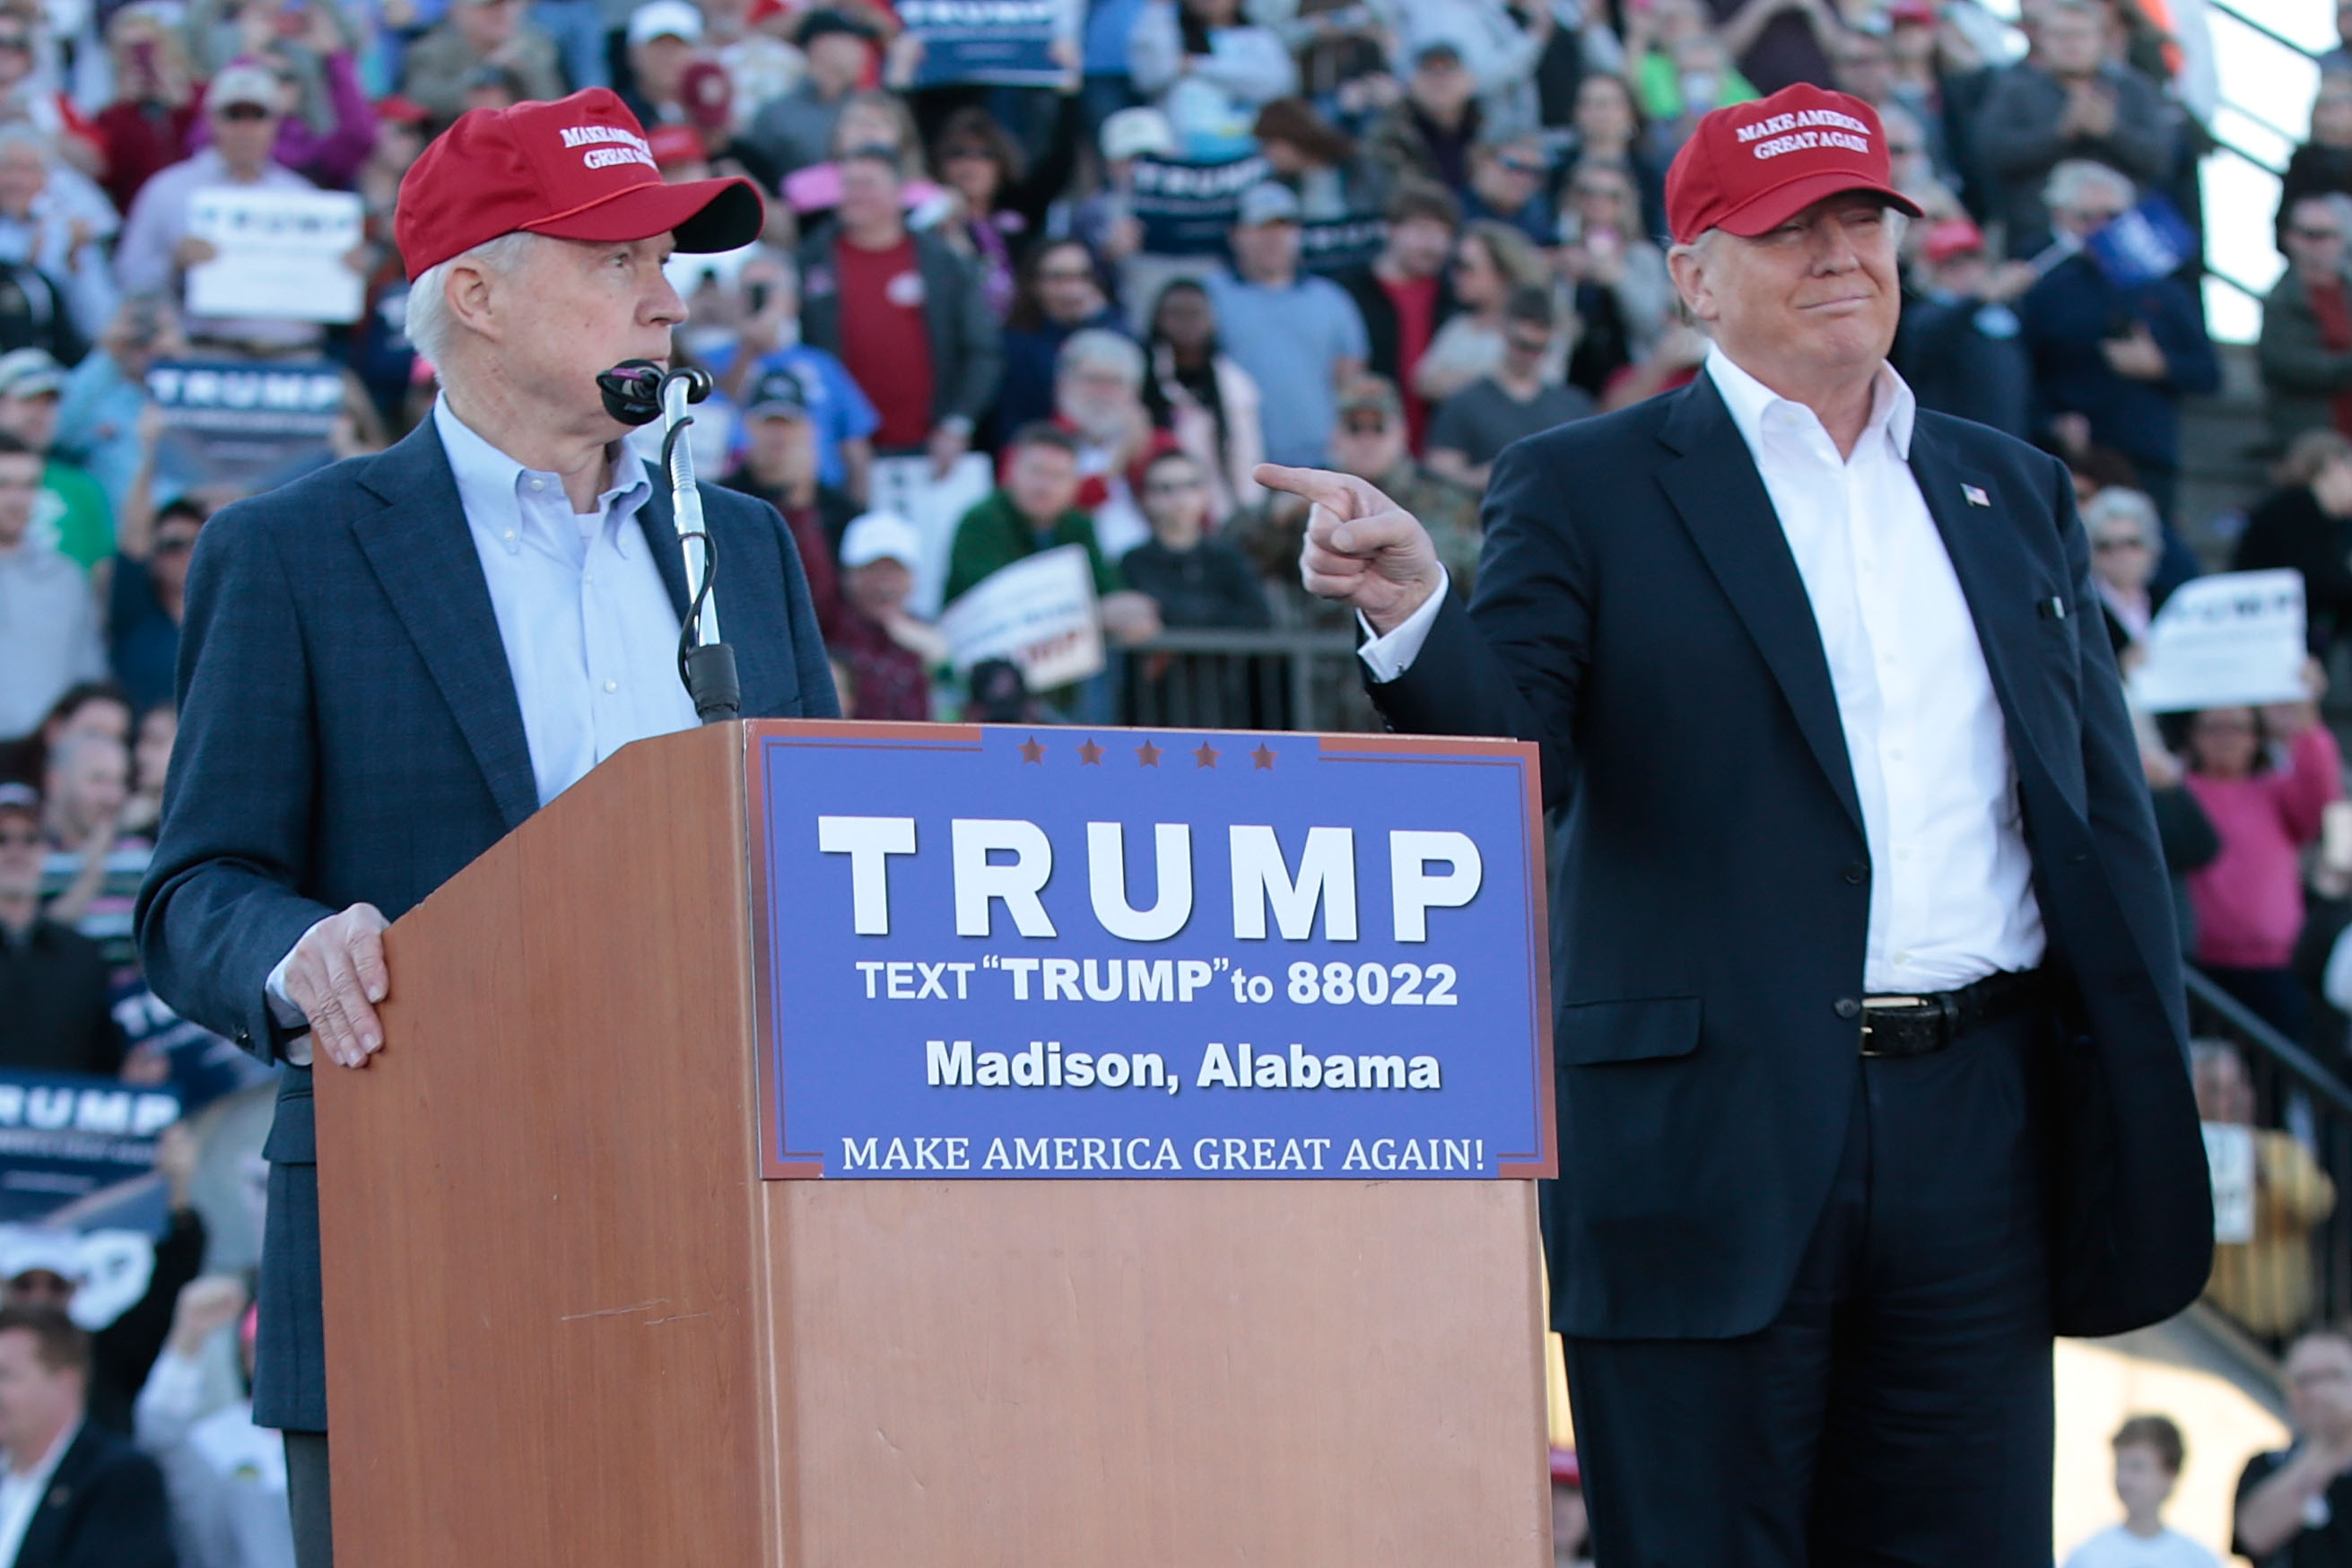 United States Senator Jeff Sessions, R-Alabama, becomes the first Senator to endorse Donald Trump for President of the United States at Madison City Stadium on February 28, 2016 in Madison, Alabama. (Photo by Taylor Hill/WireImage) (Taylor Hill&mdash;WireImage)